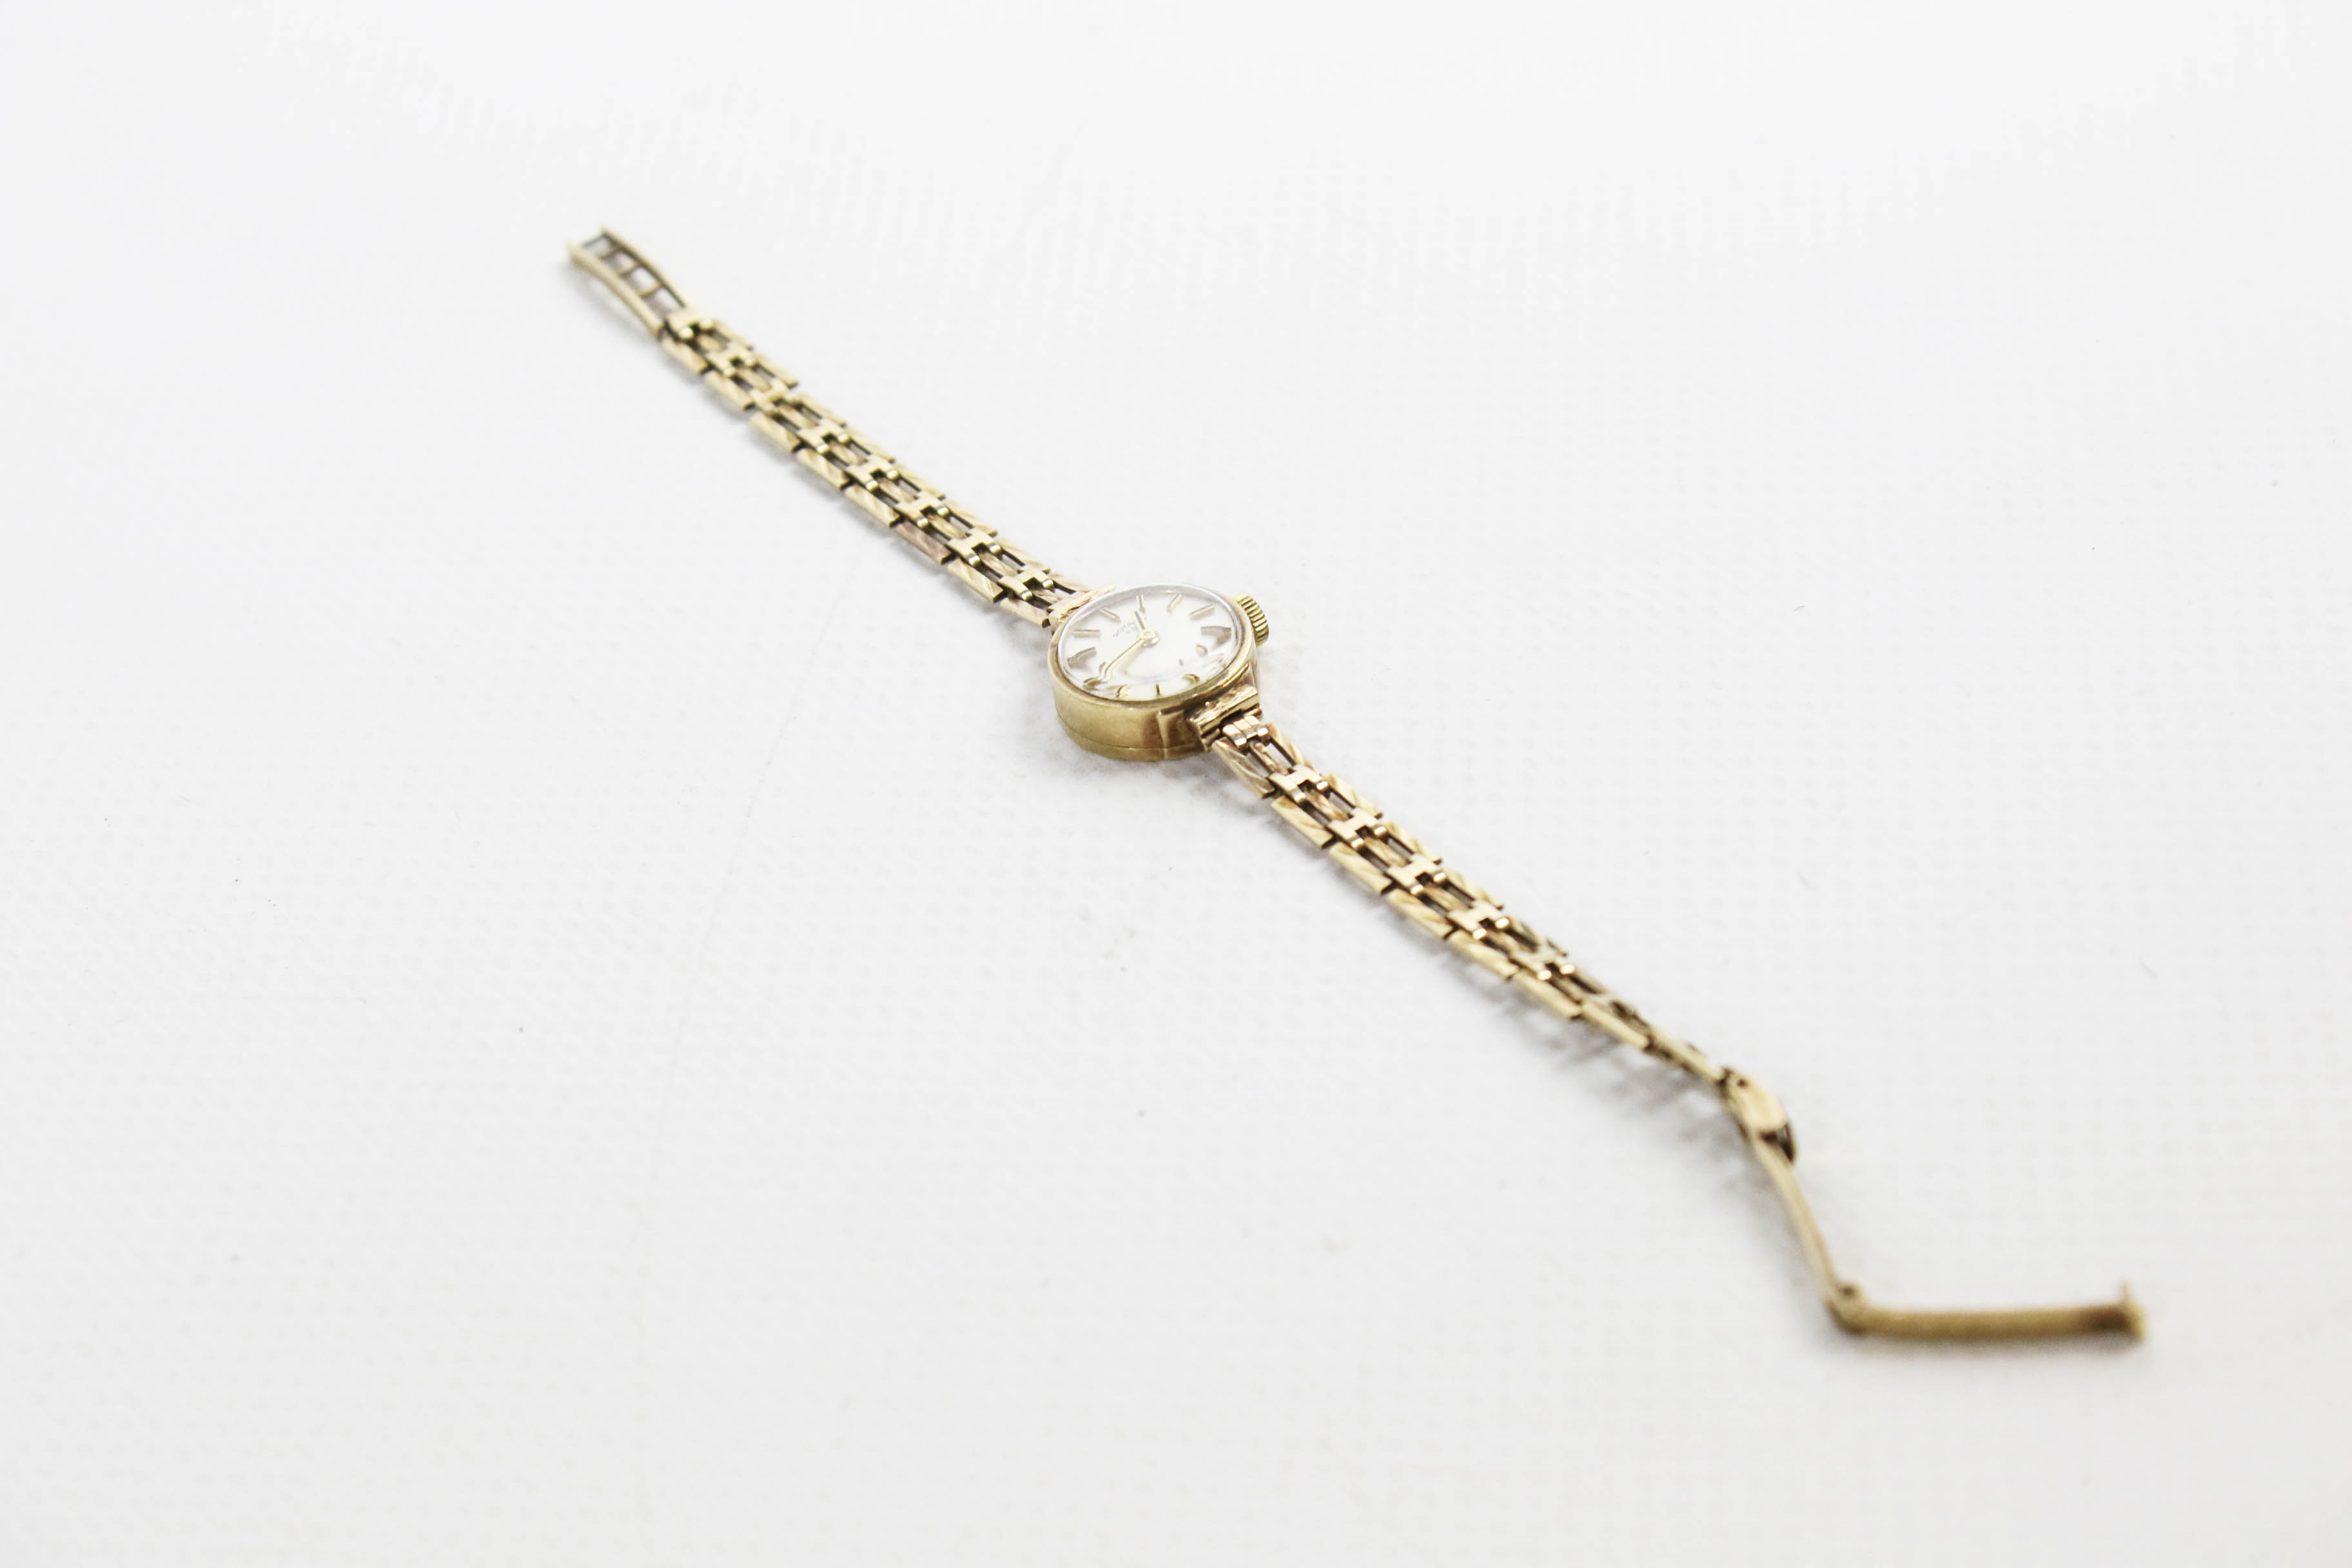 Rotary, a lady's 9ct gold round bracelet watch, circa 1979. - Image 3 of 4